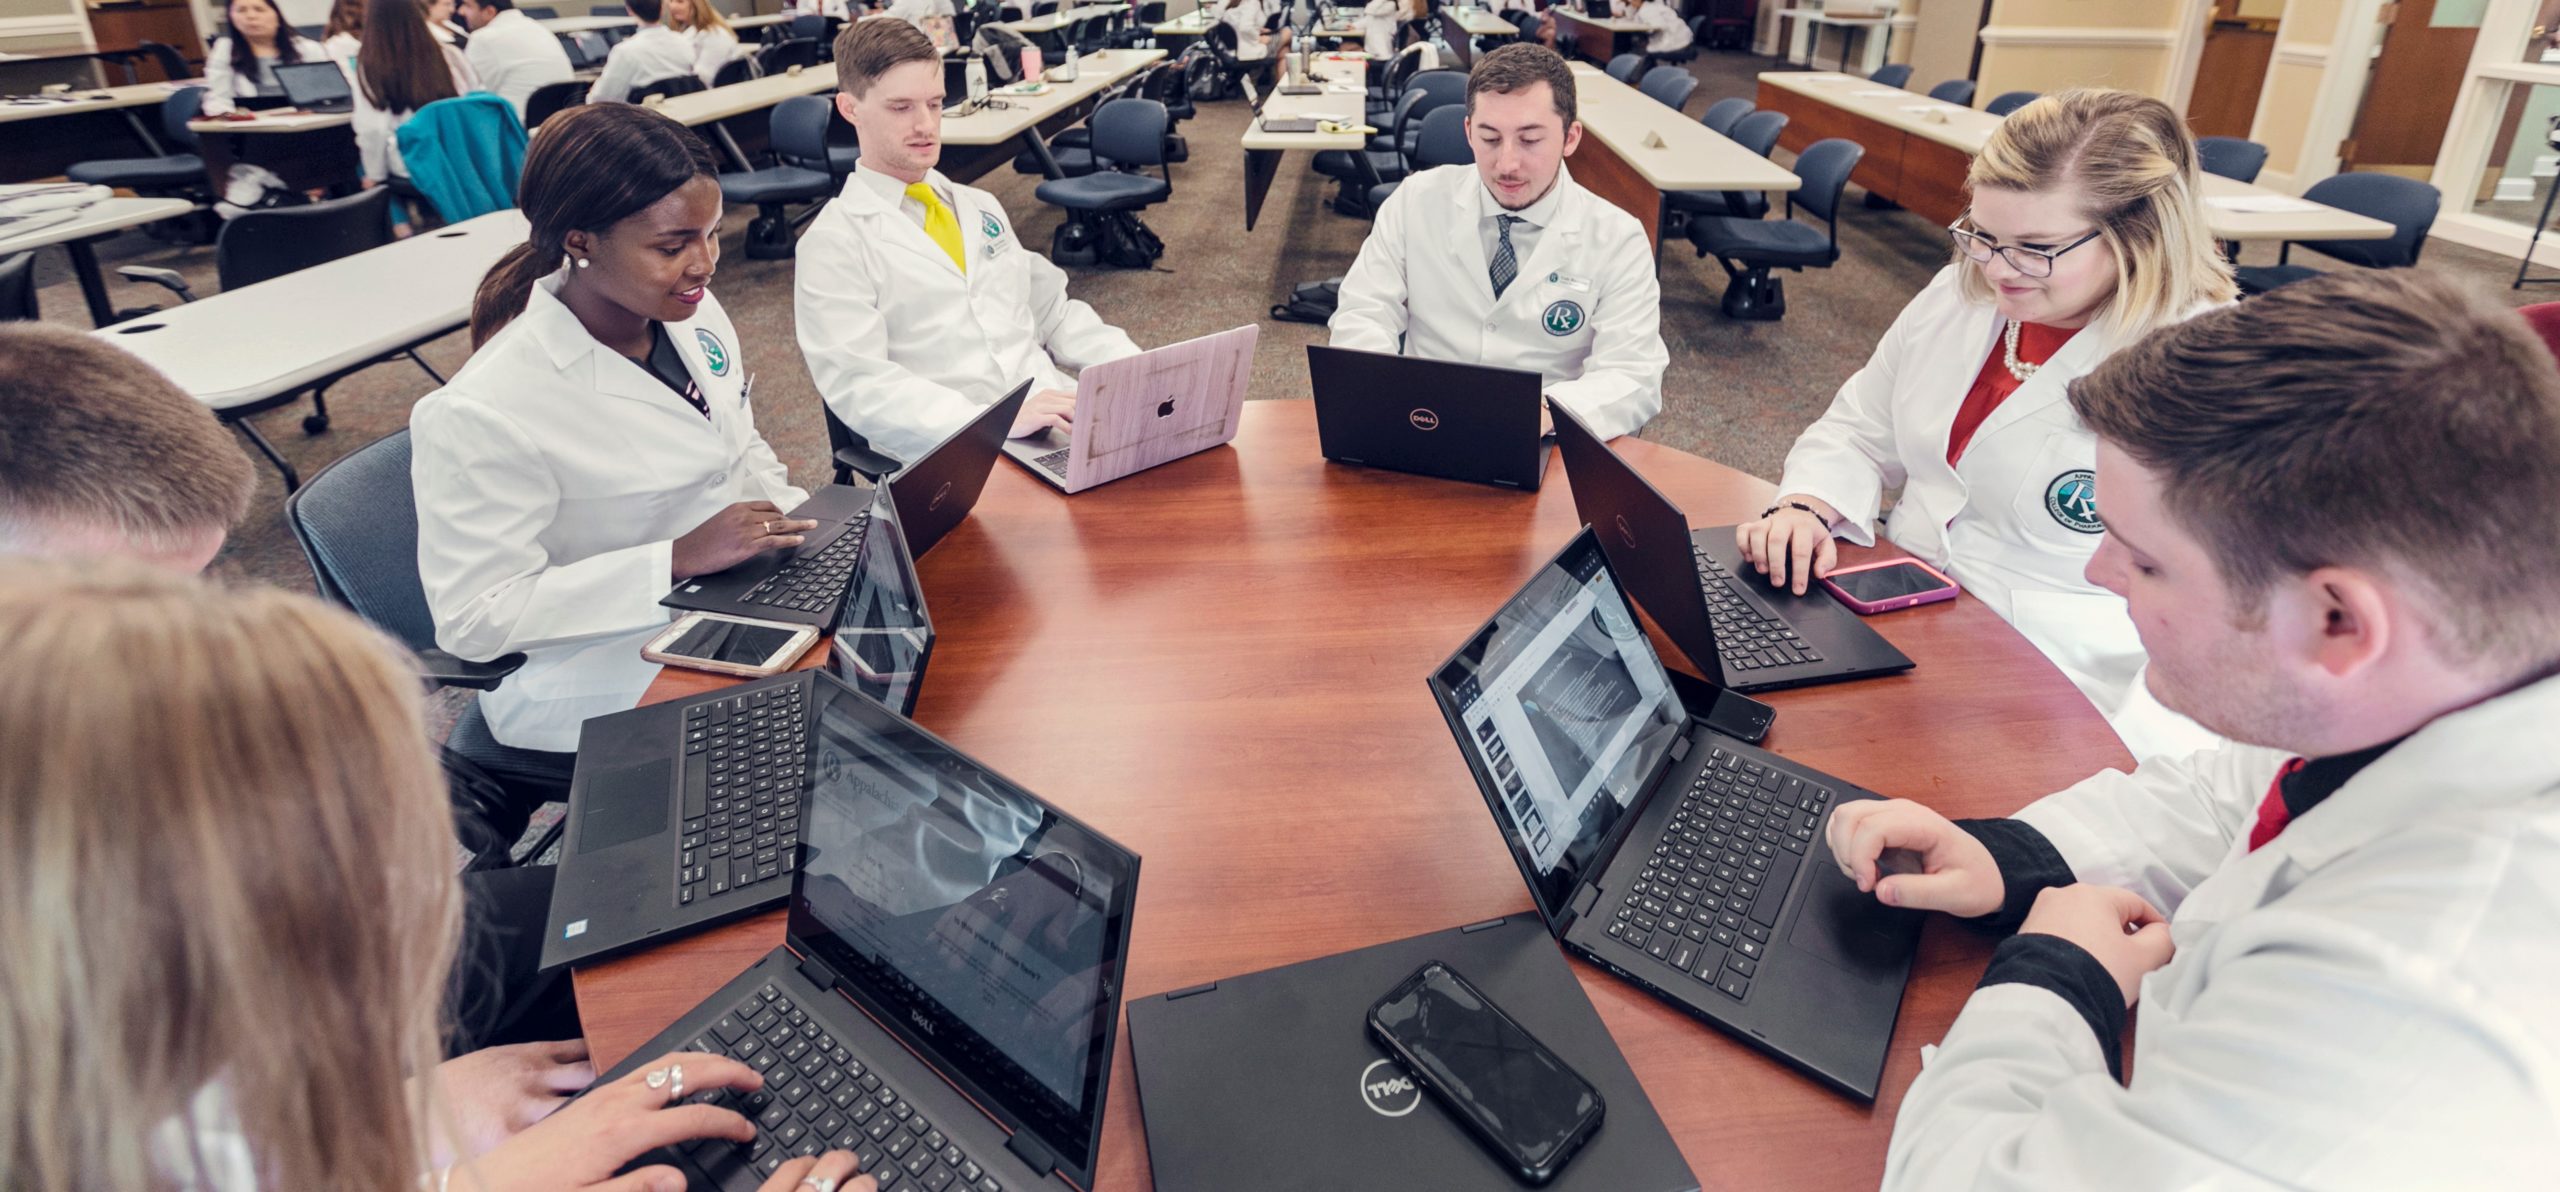 student group in lab coats working on laptops